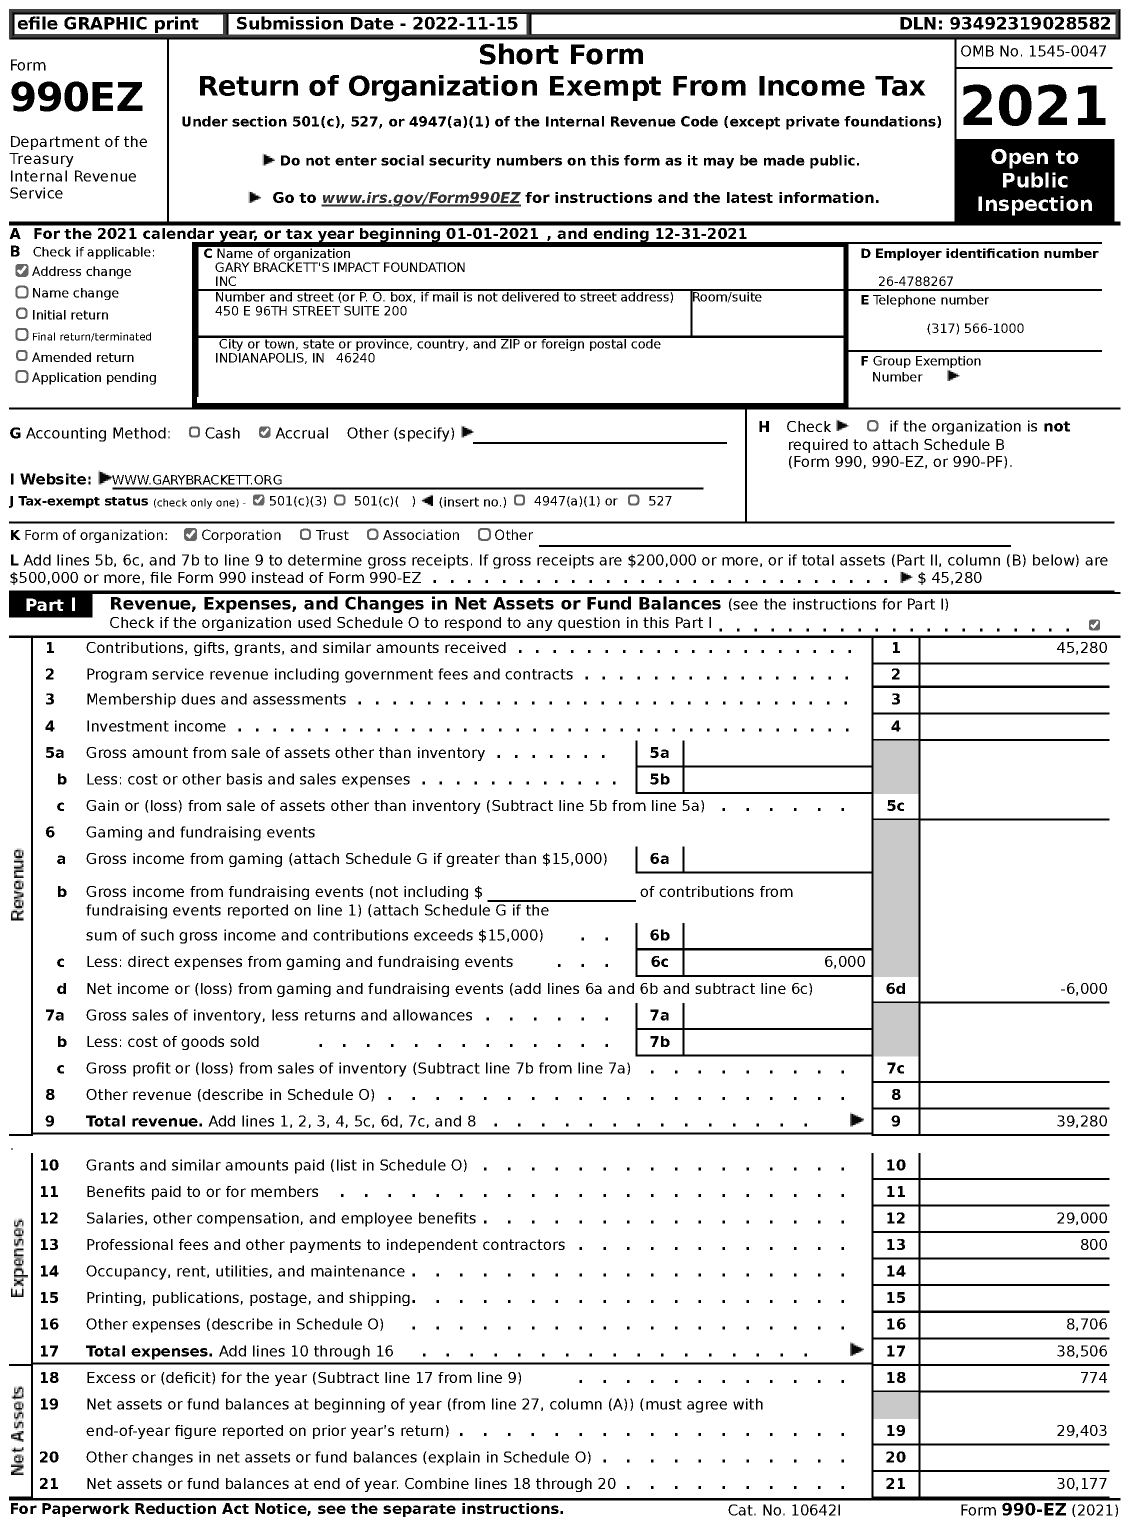 Image of first page of 2021 Form 990EZ for Gary Brackett's Impact Foundation